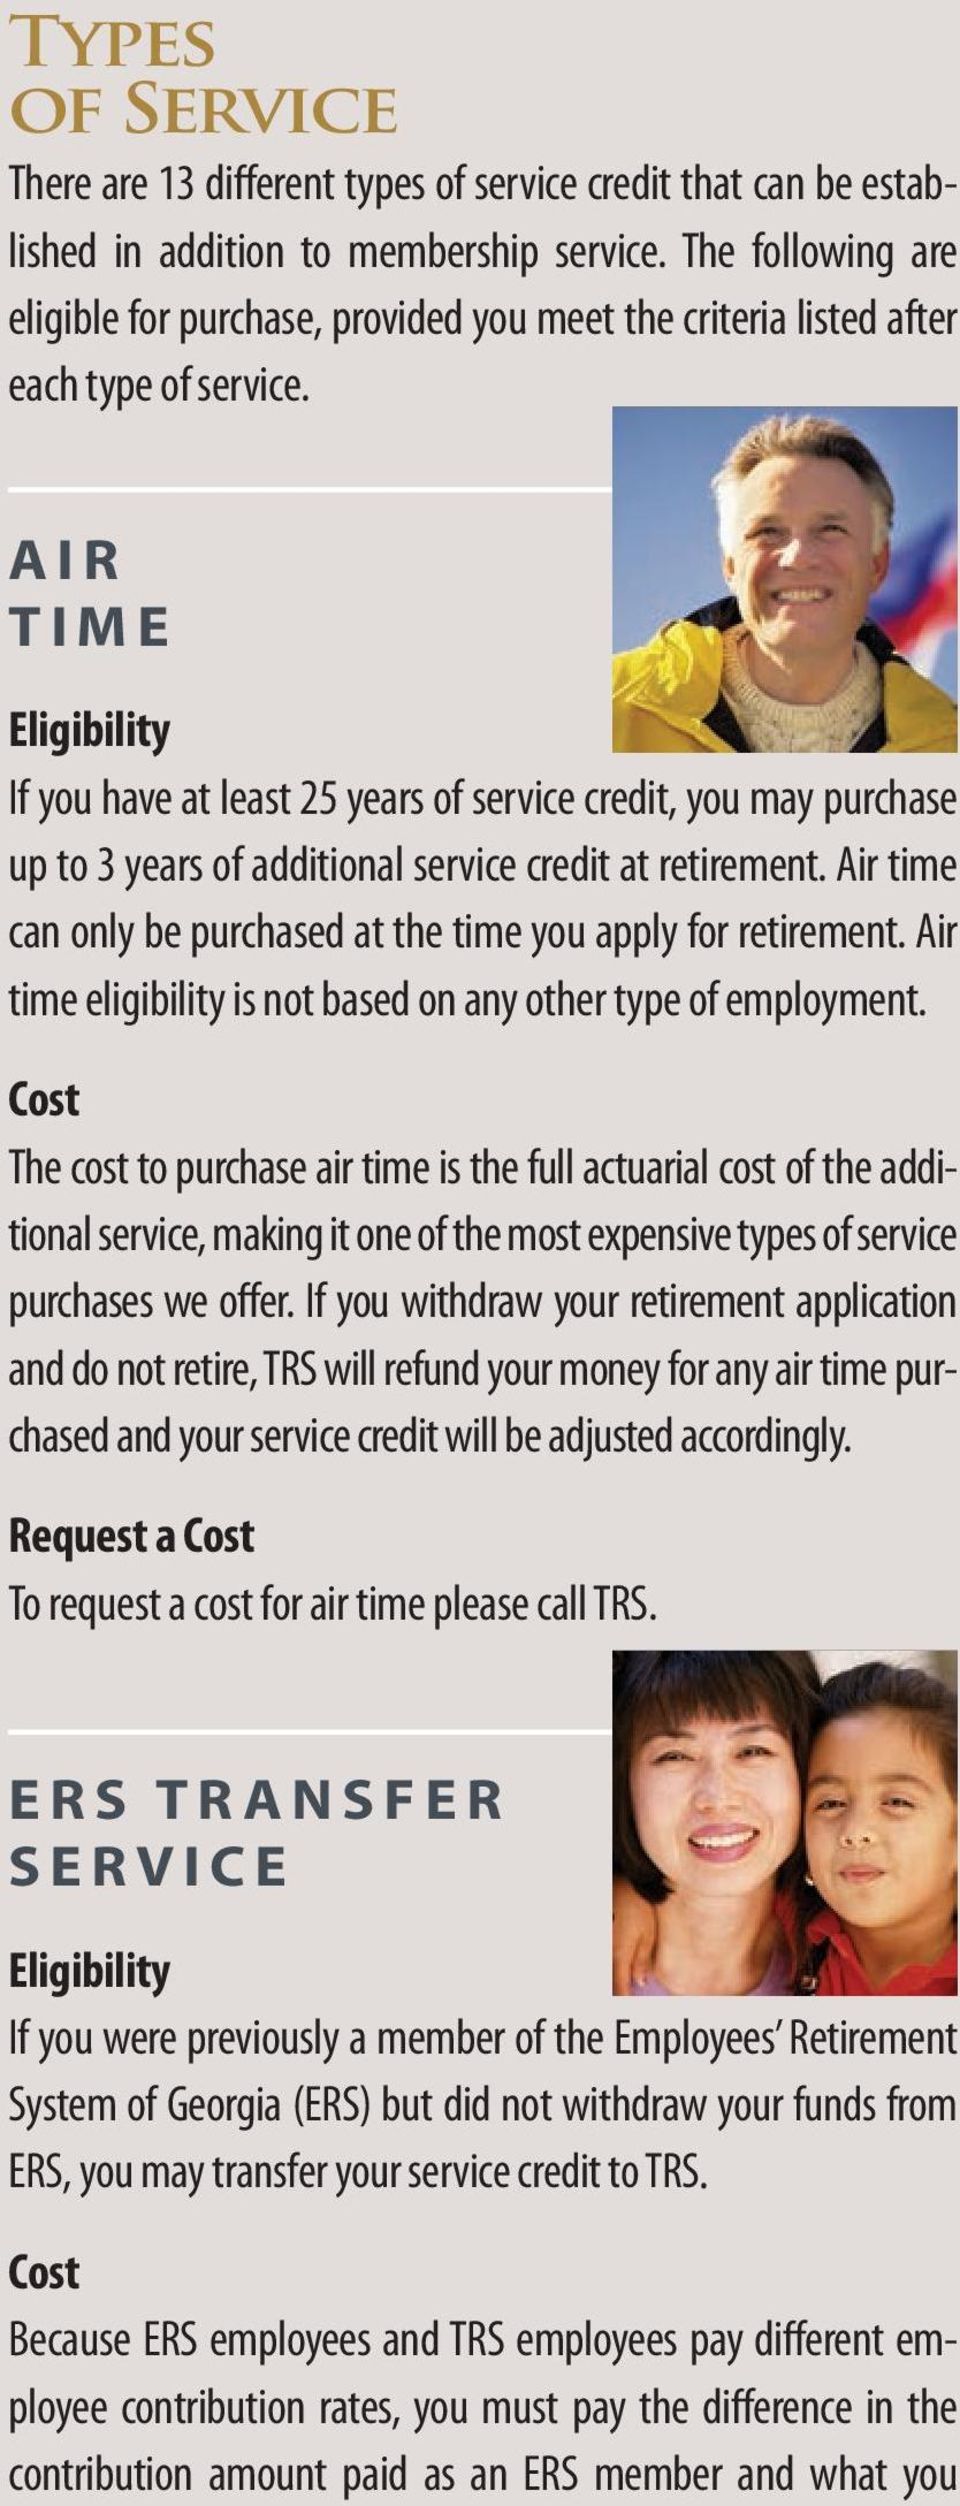 AIR TIME If you have at least 25 years of service credit, you may purchase up to 3 years of additional service credit at retirement.